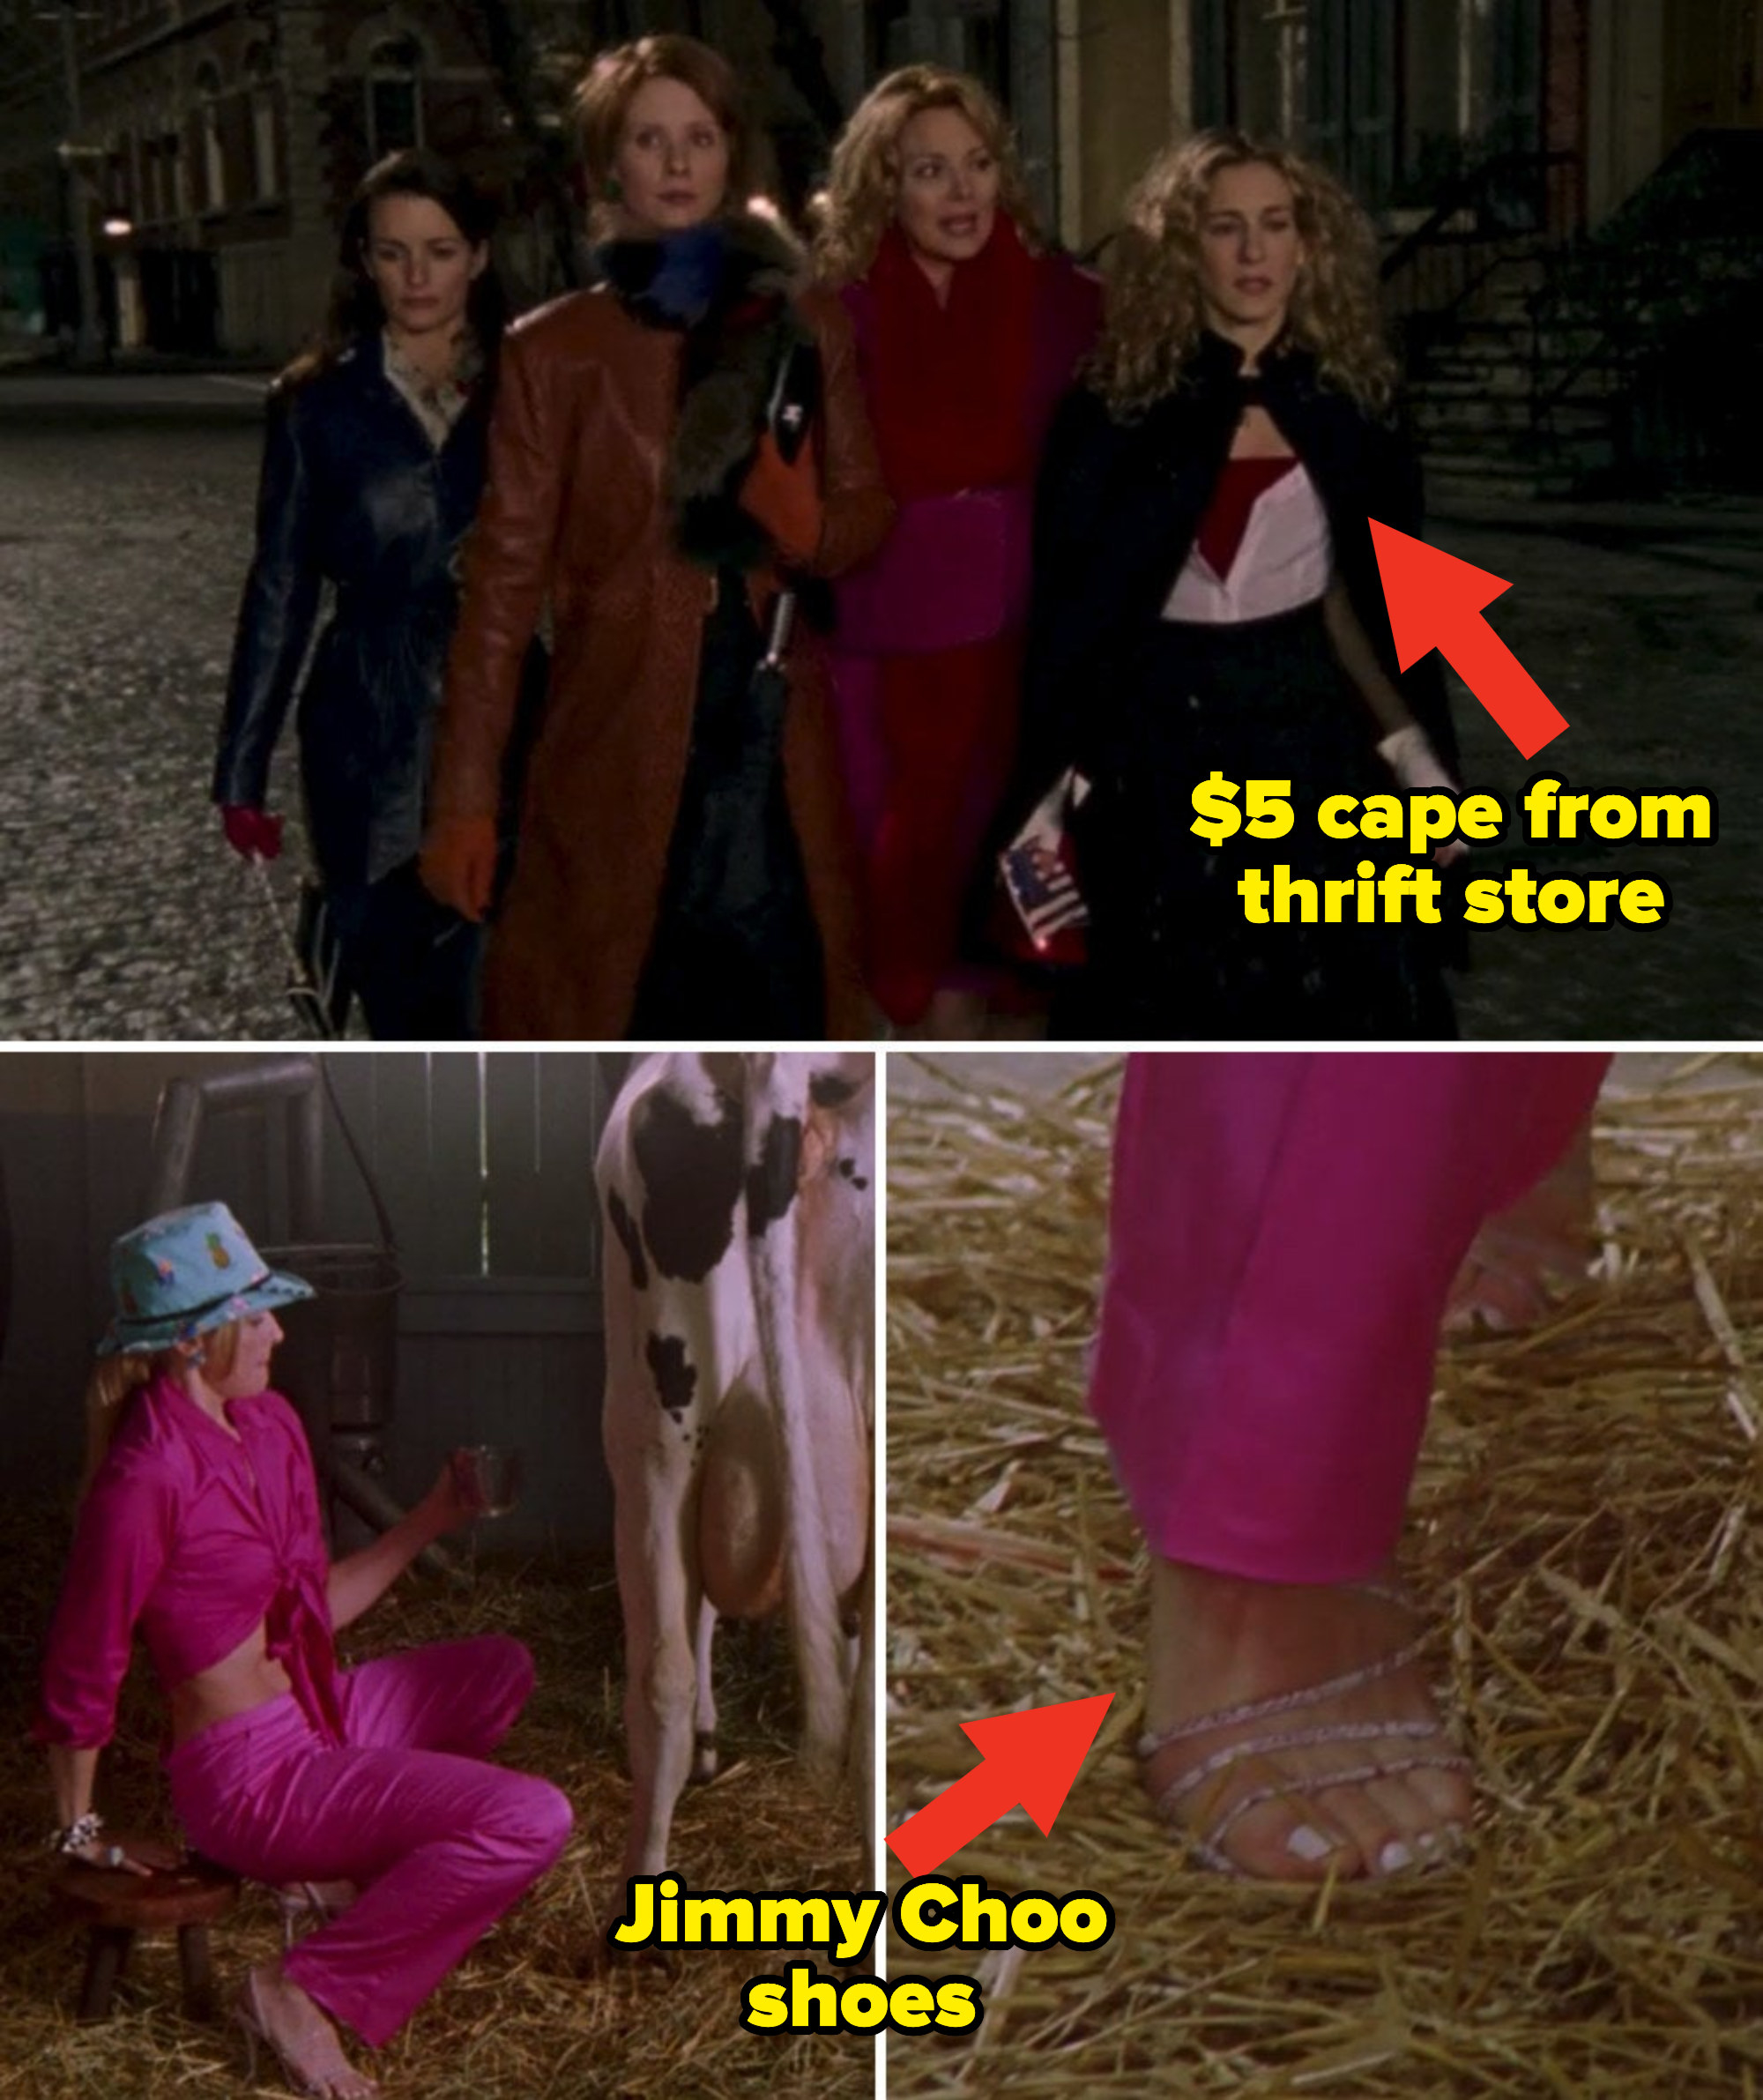 Miranda, Samantha, Carrie, and Charlotte in the middle of the street walking to a party; Samantha trying to milk a cow while wearing Jimmy Choo shoes